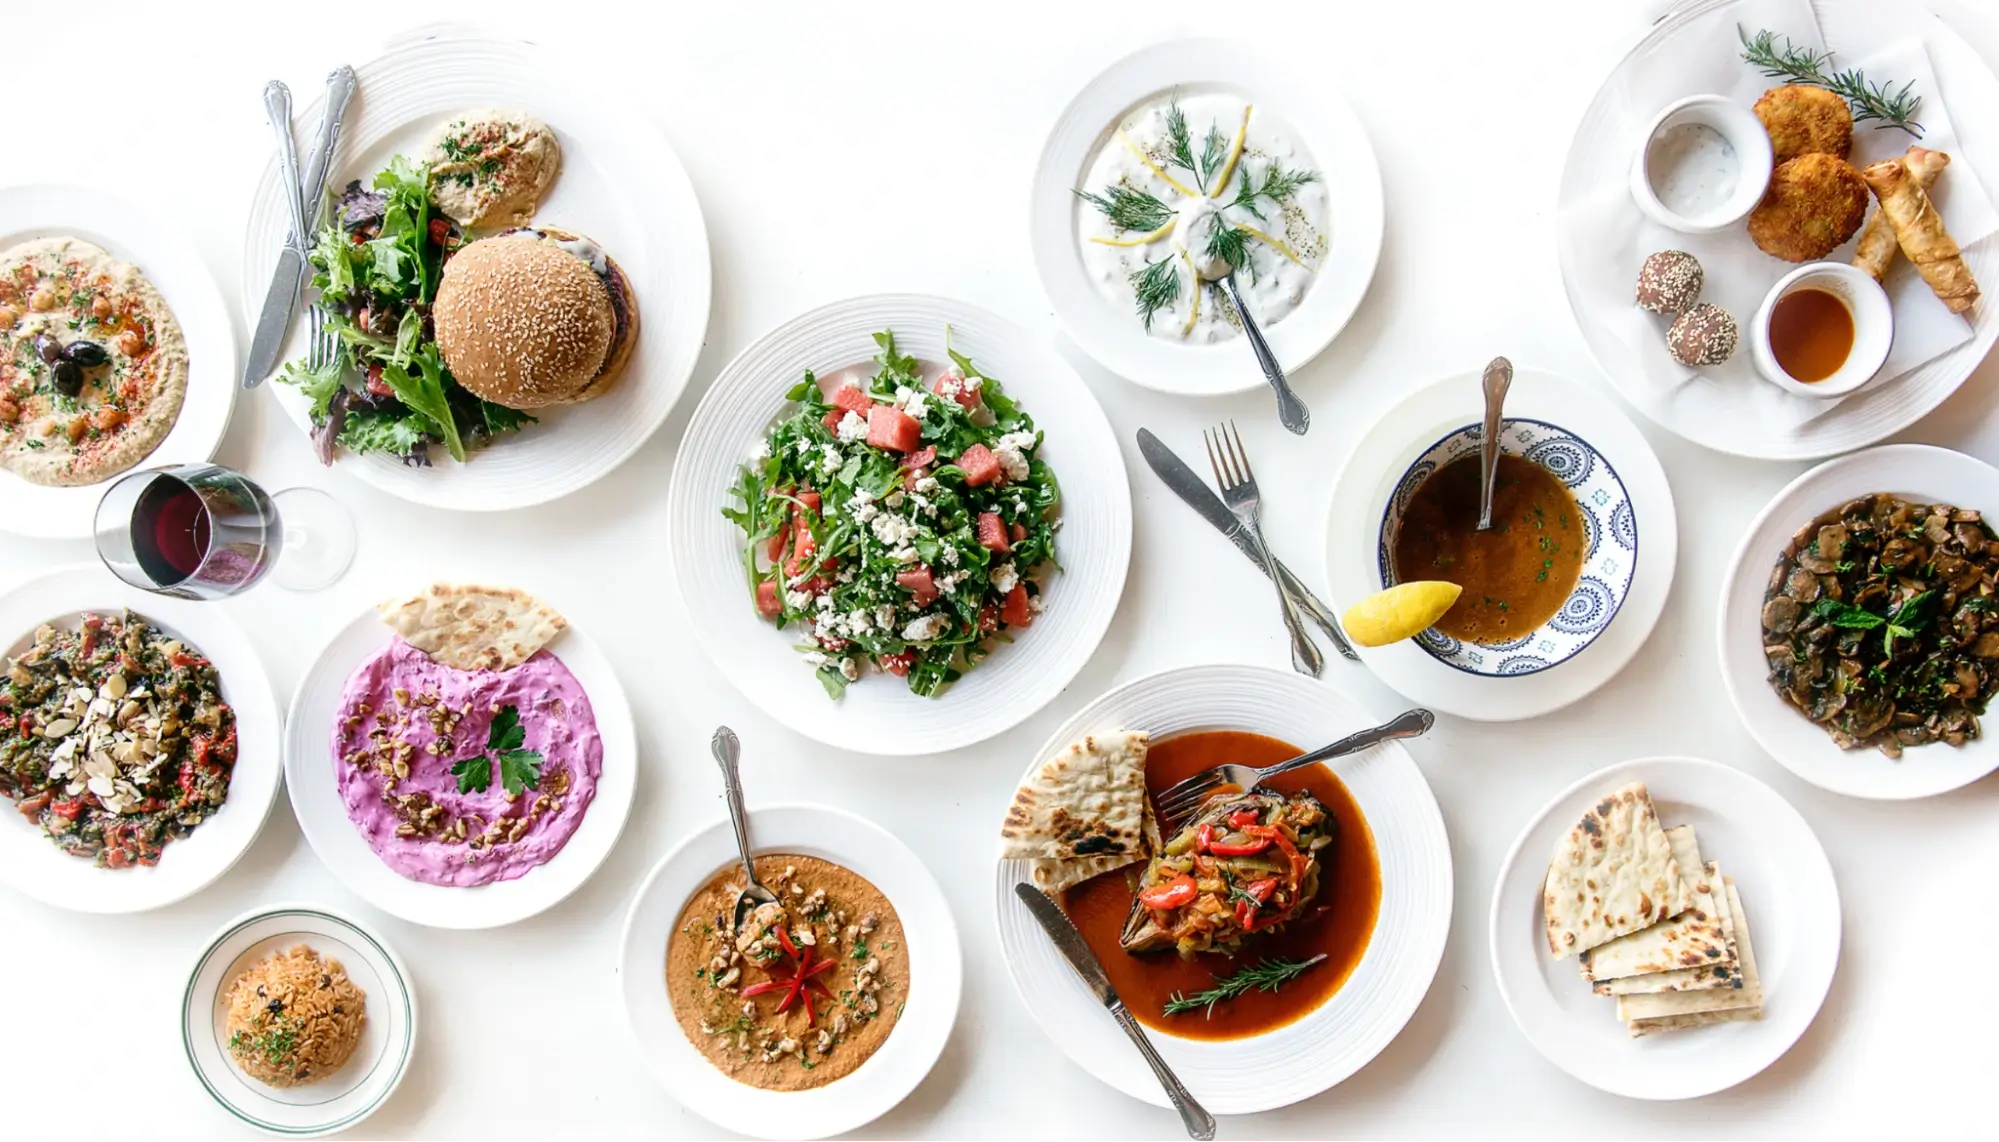 An assortment of Mediterranean meals in white dishes on a white background